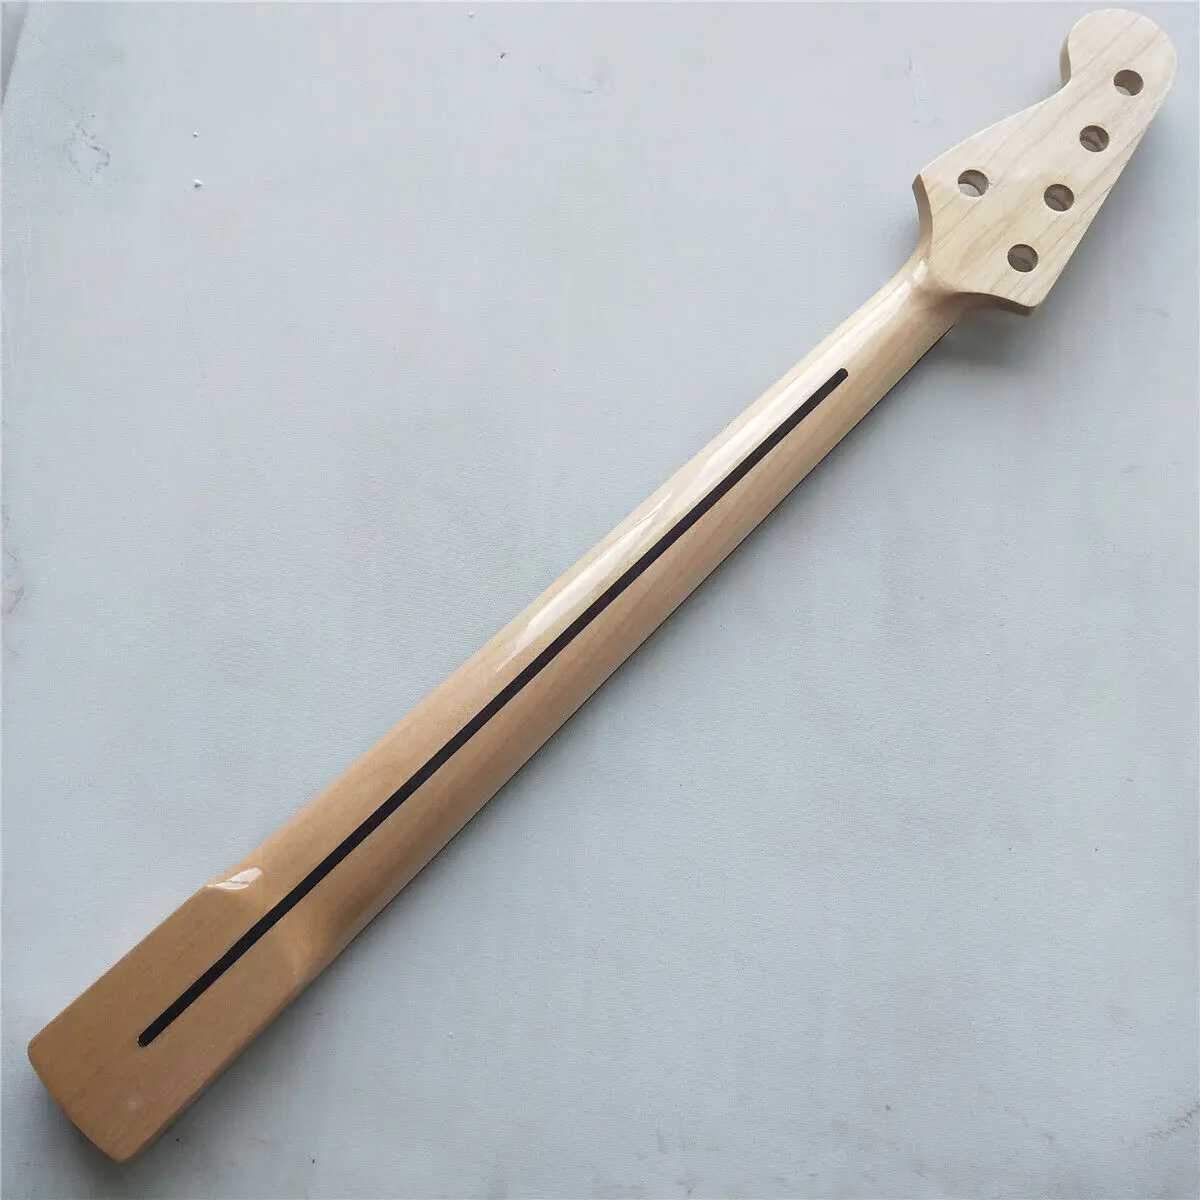 Bass Guitar Neck 20 Fret 34 inch 5 string Bass Neck Maple fretboard Block inlay New Replacement for DIY enlarge